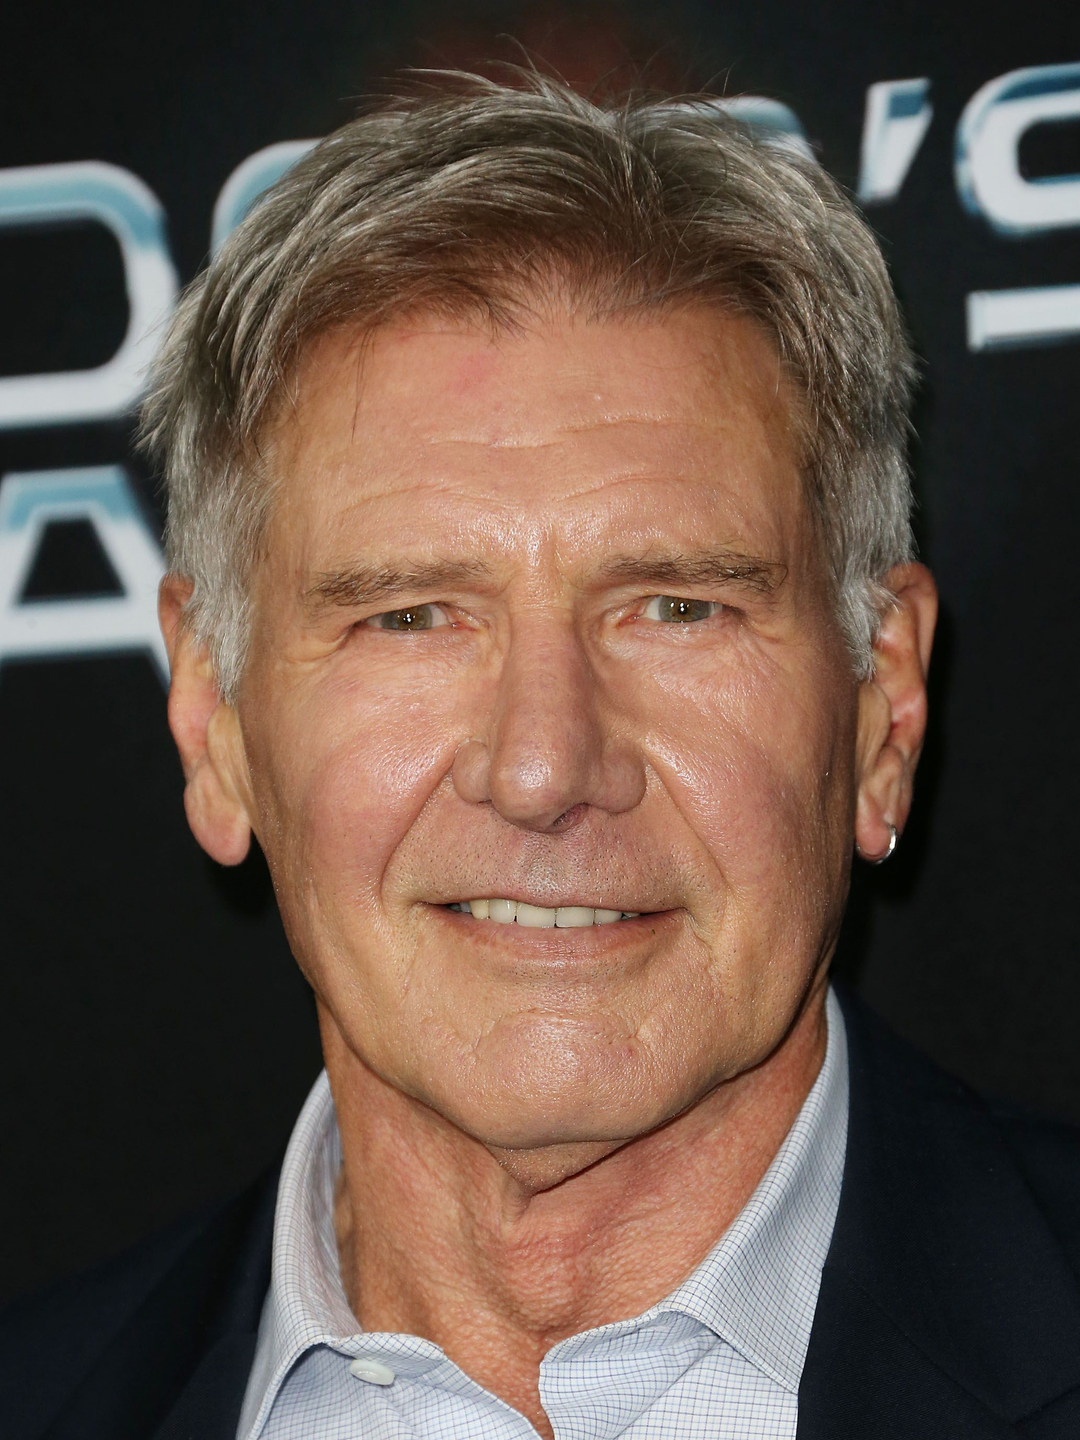 Harrison Ford young age